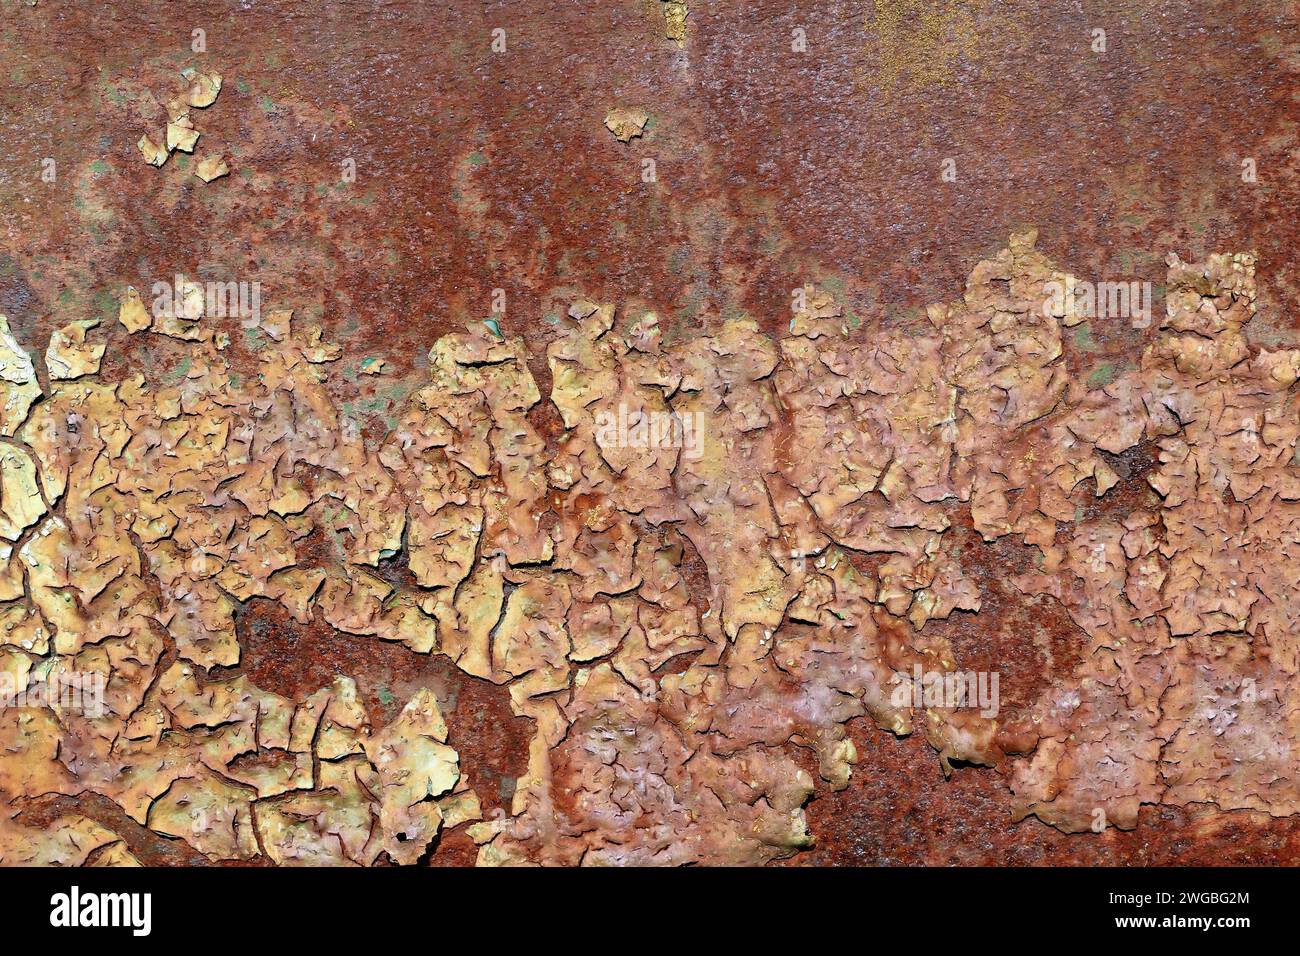 Flaking paint from the metal surface, grunge texture Stock Photo